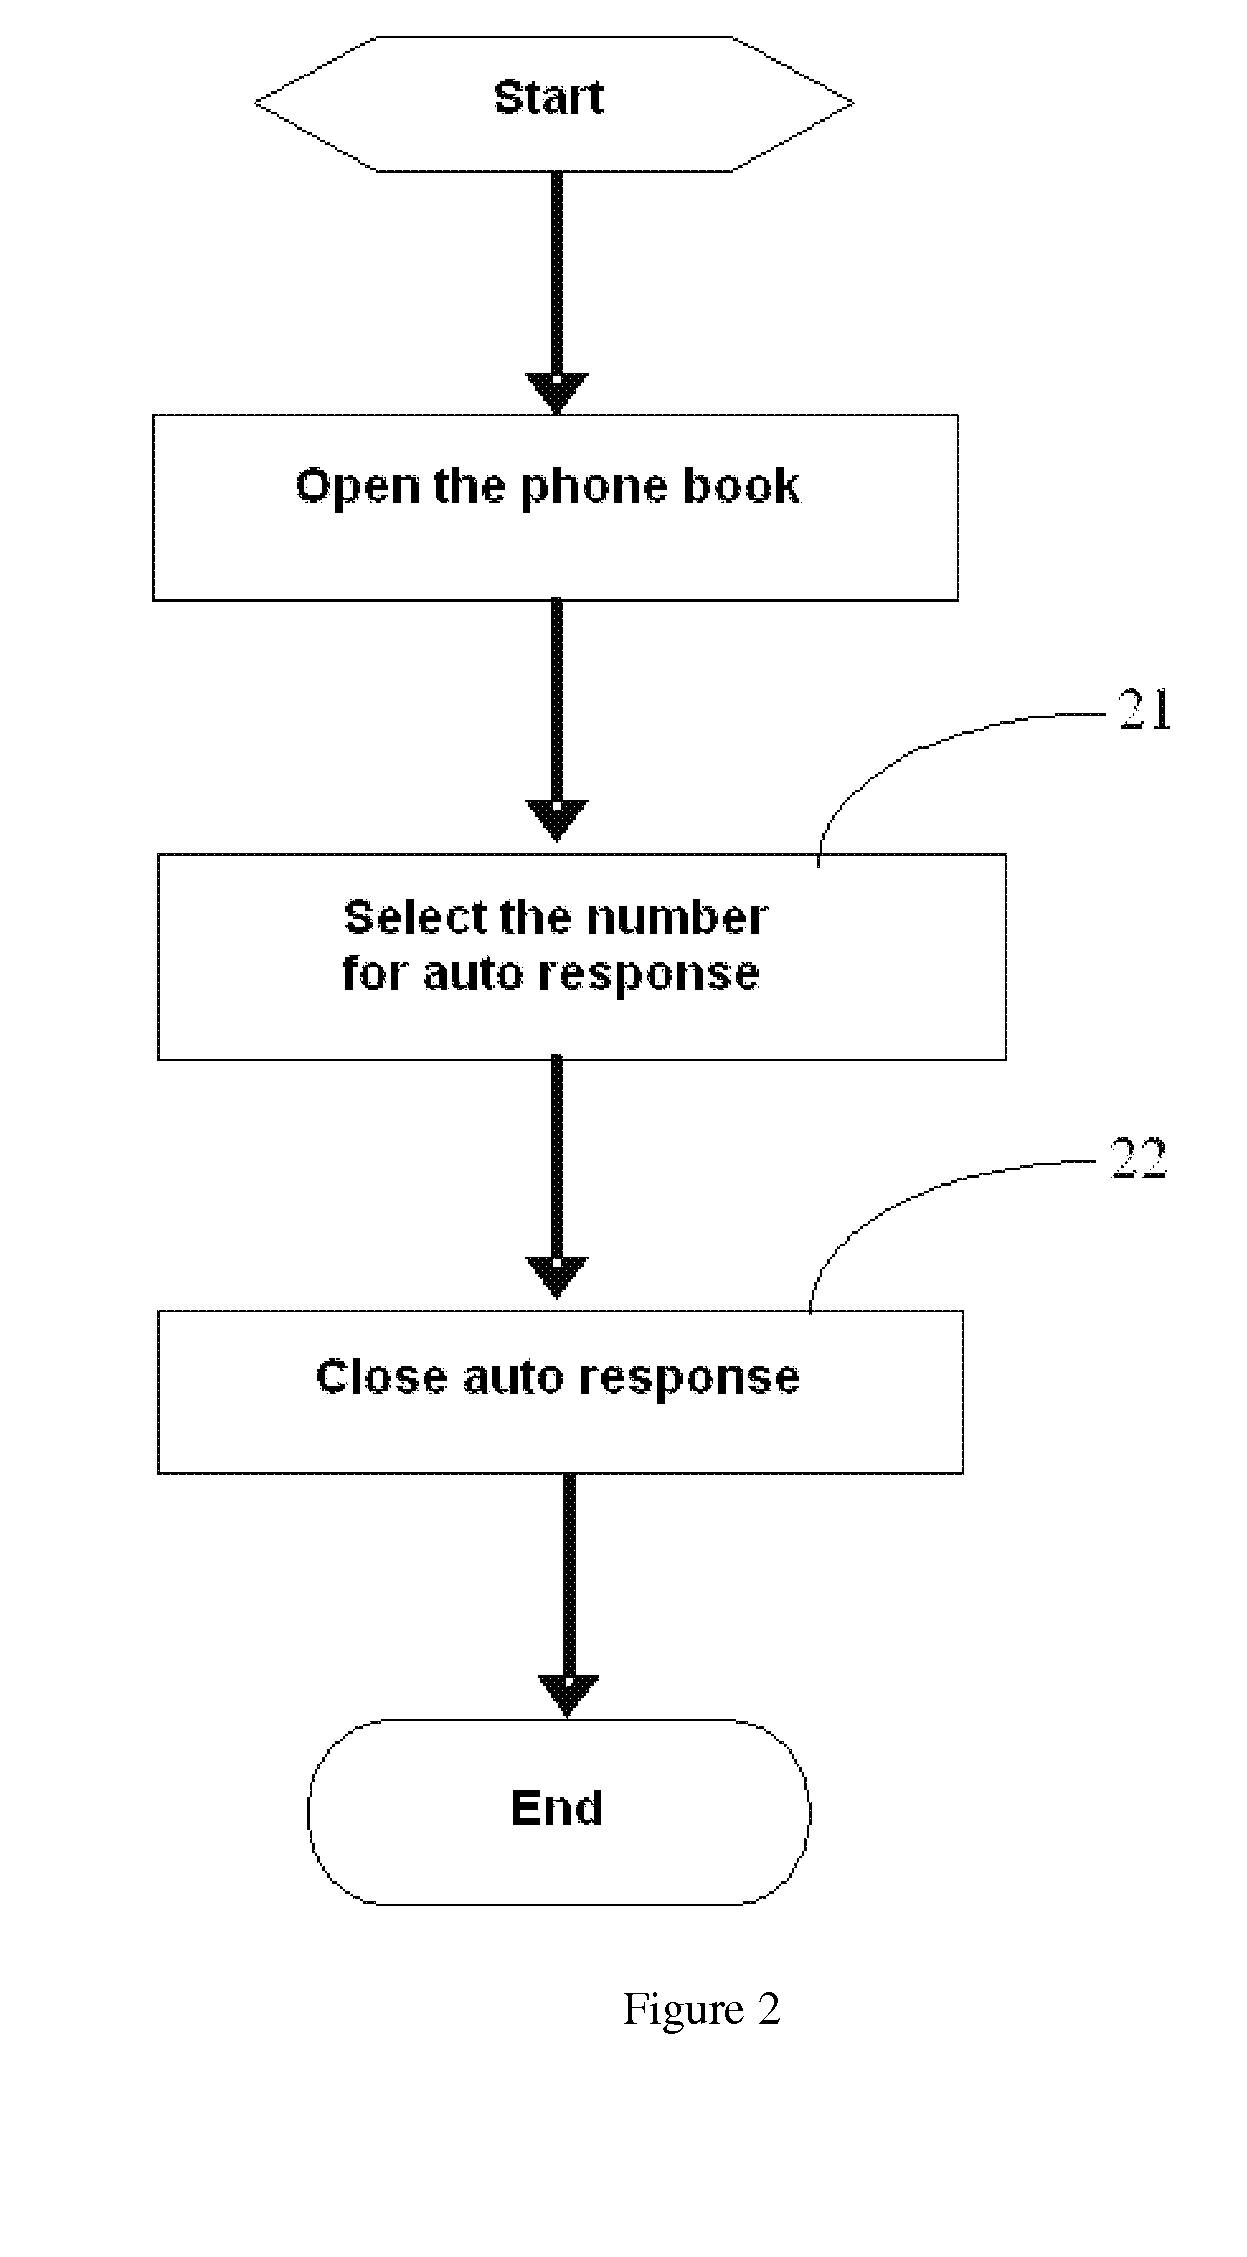 Method for automatically responding to mobile phone short messages